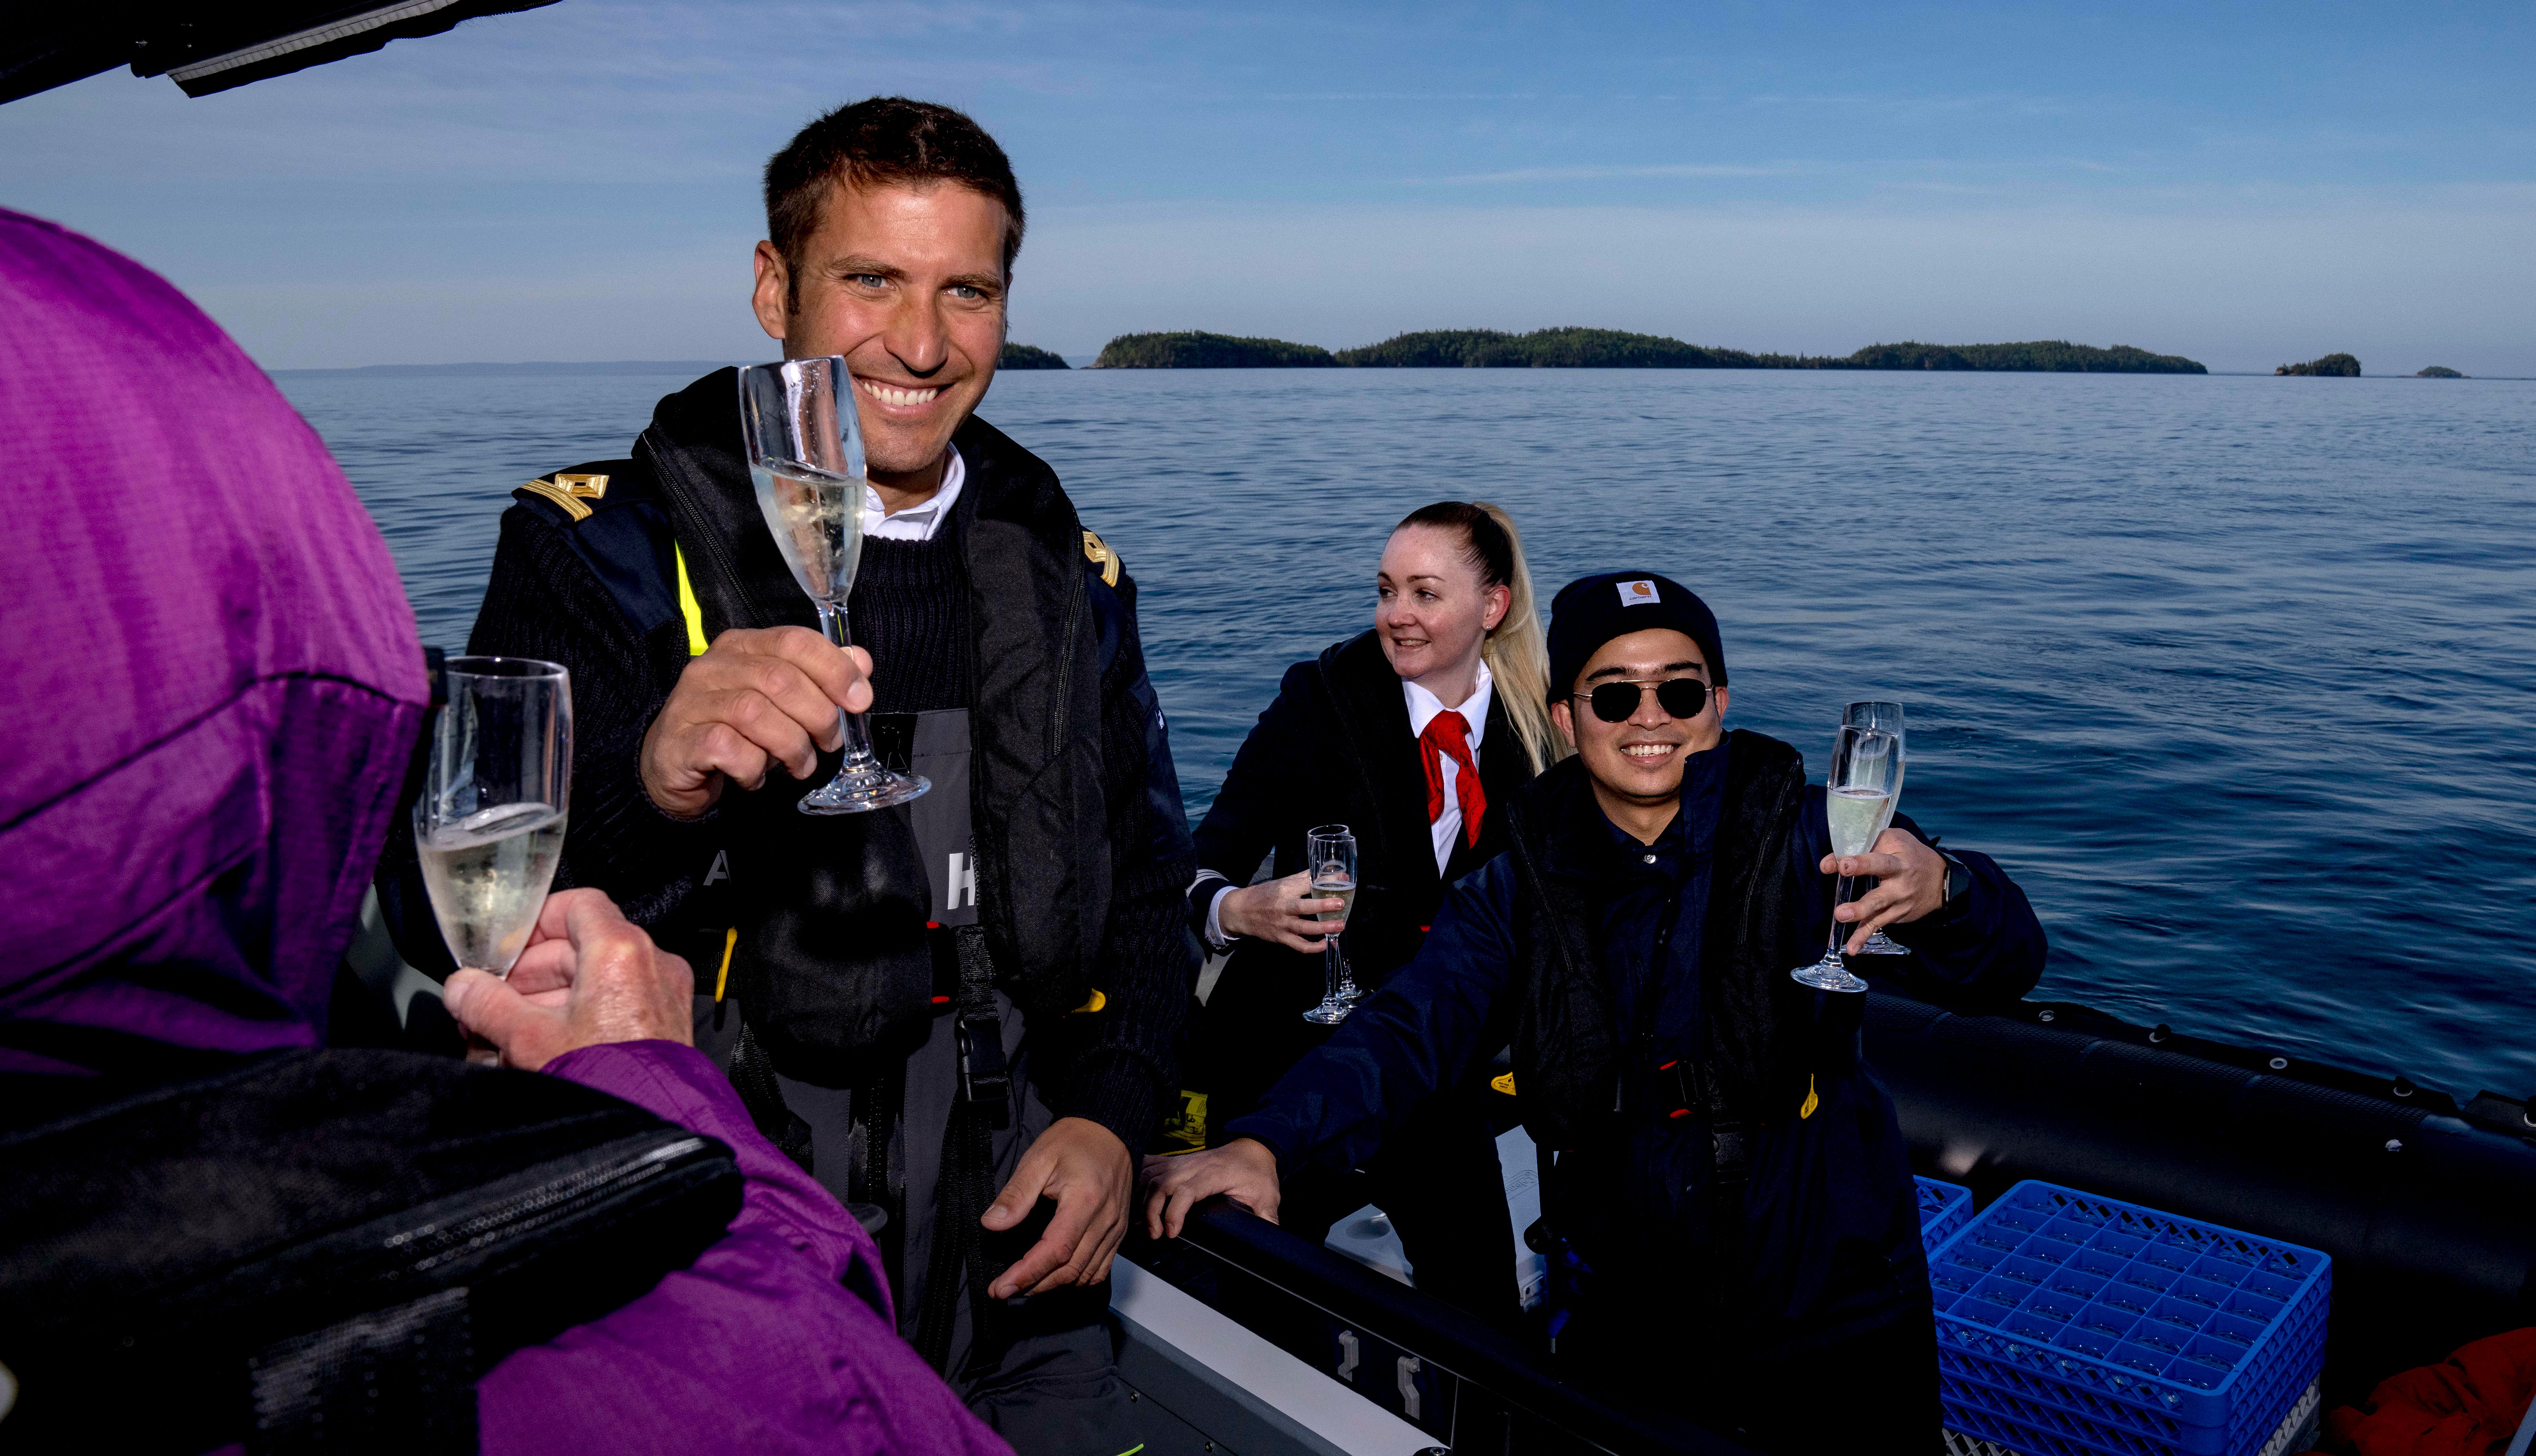 Third officer Nikola Marinovic, left, beverage manager Tammy Marshall and crew member Darrell Ganoria raise champagne glasses in Silver Islet in Ontario, Canada, on June 24. The Special Operations Boat saw a Zodiac boat in the distance that looked stranded, and crew members surprised the passengers with glasses of champagne.